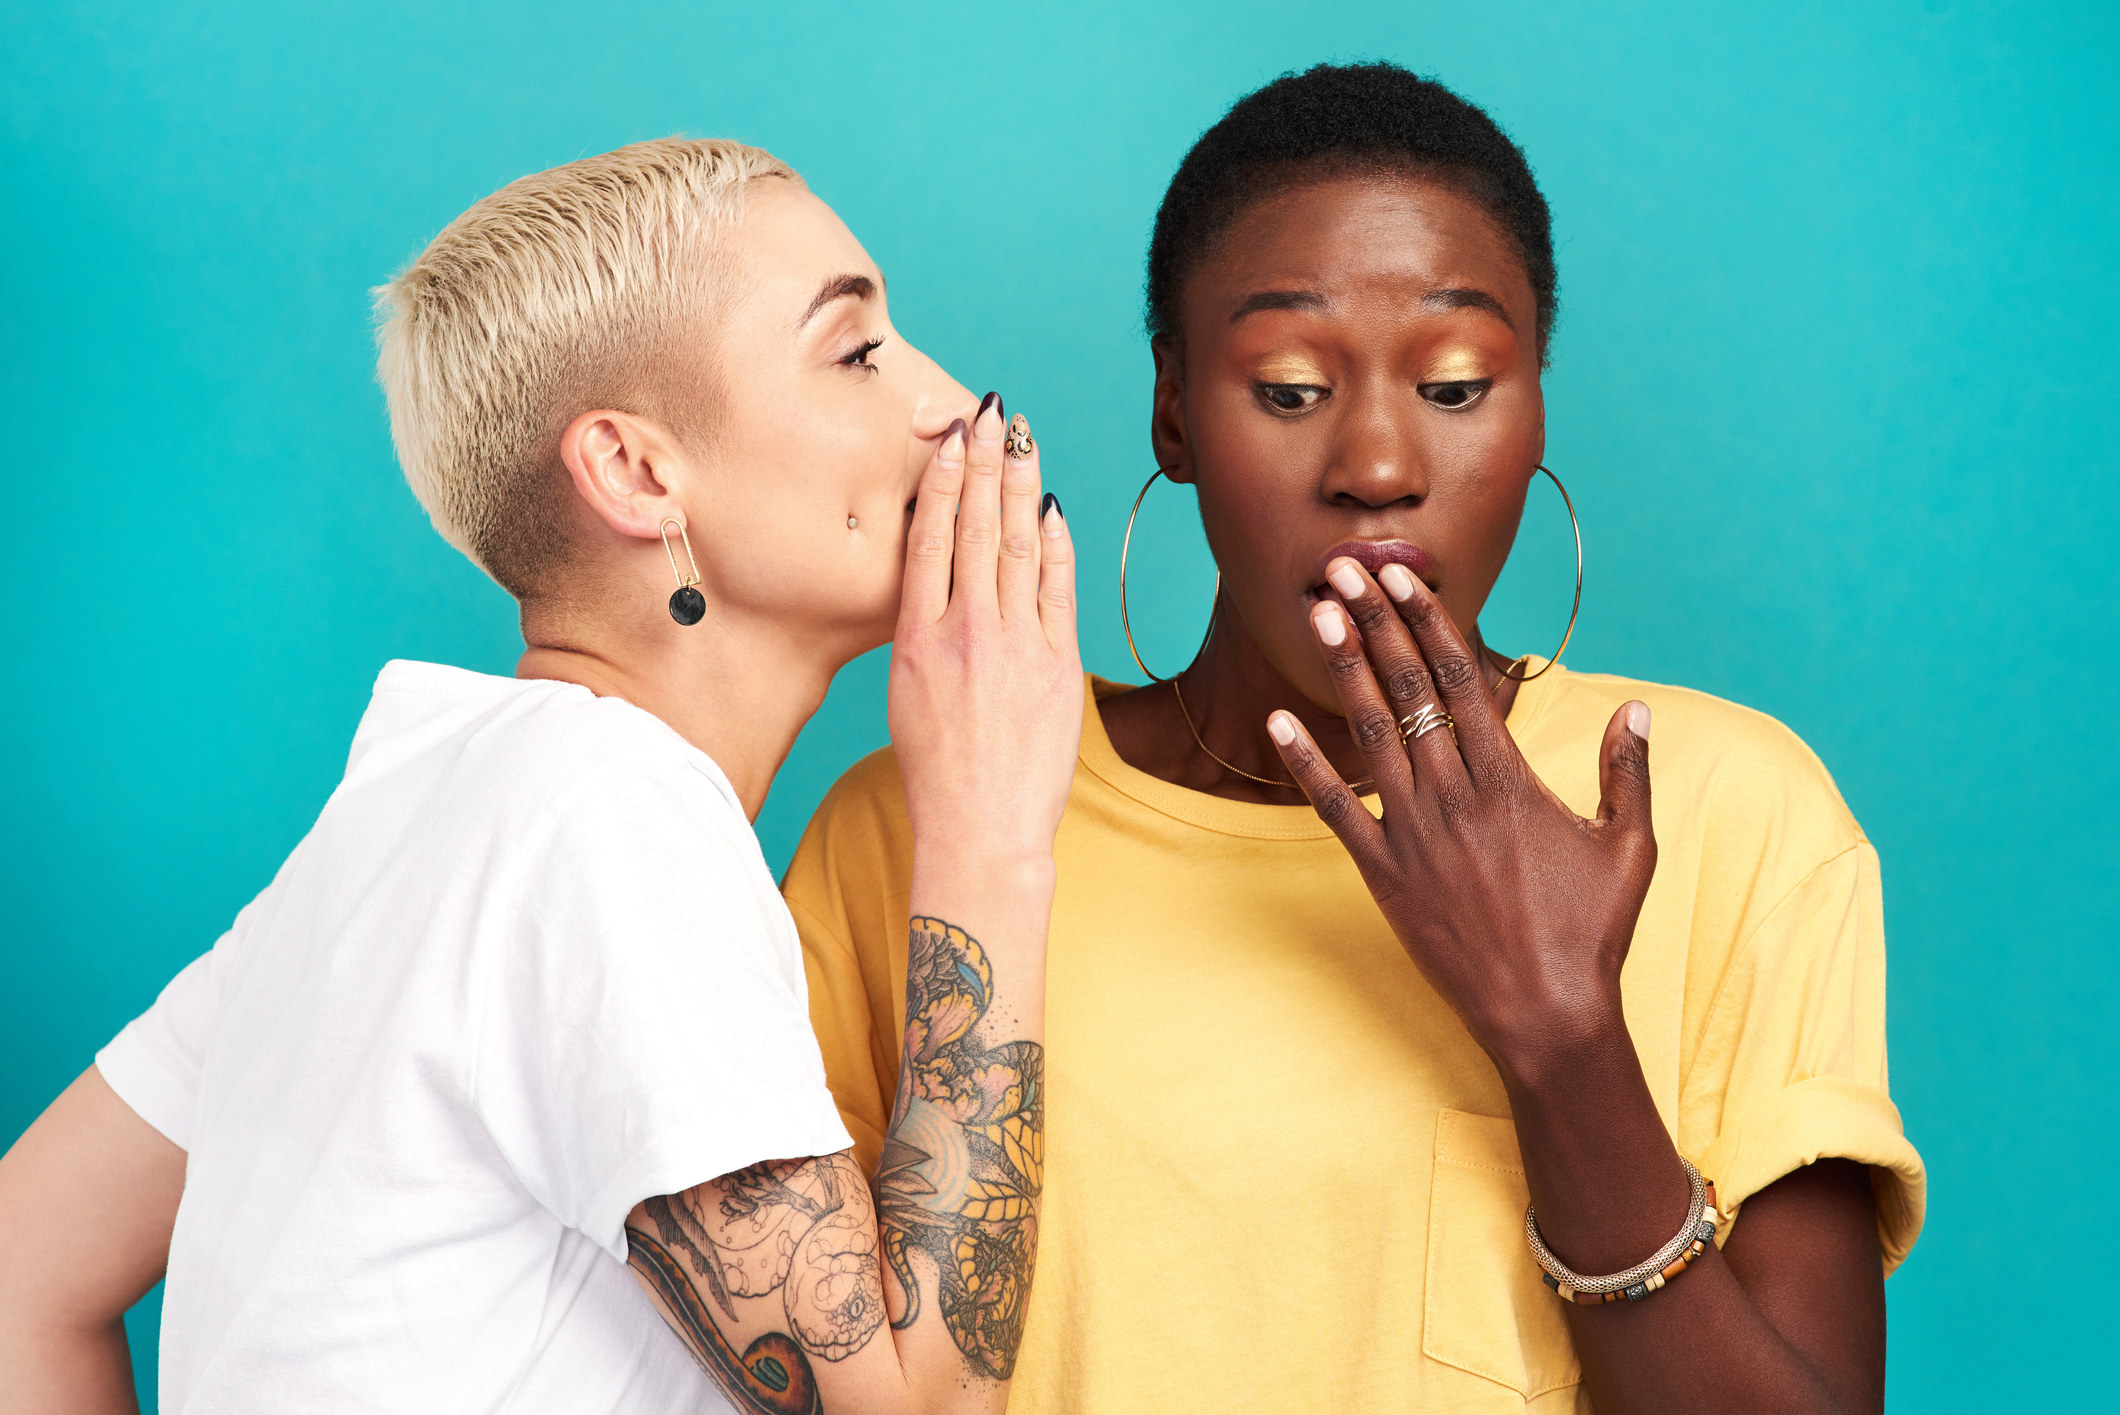 Studio shot of a young woman whispering in her friendâ€™s ear against a turquoise background